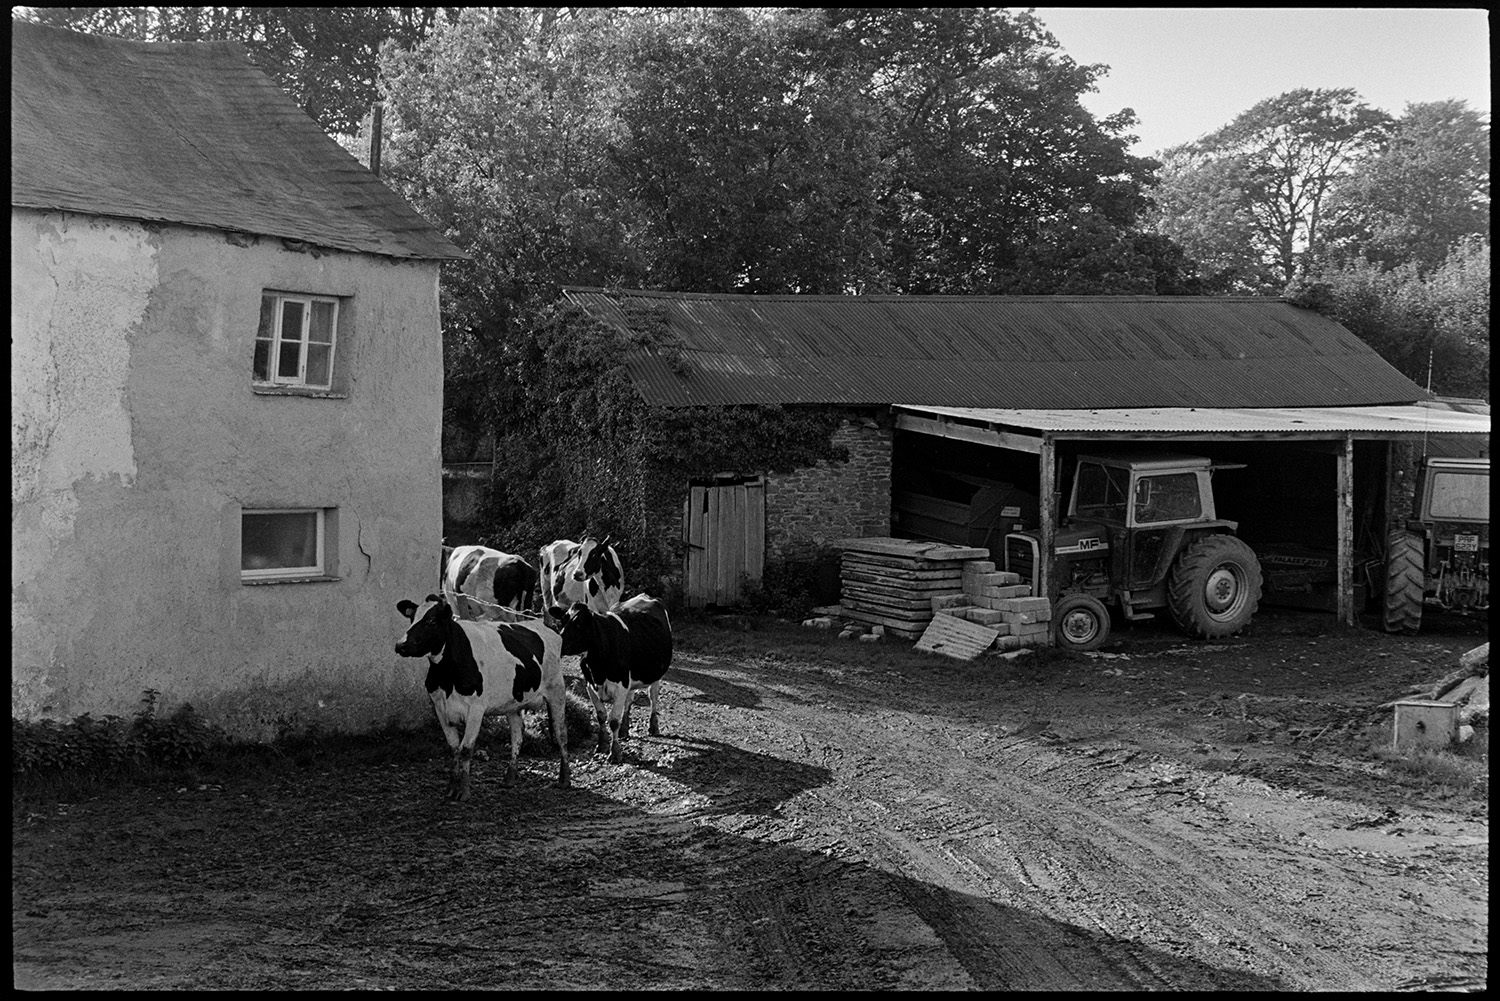 Cows going to be milked entering farmyard. 
[Cows walking into a farmyard to be milked near Northlew, Beaworthy. They are passing a shed with tractors and part of the farmhouse.]